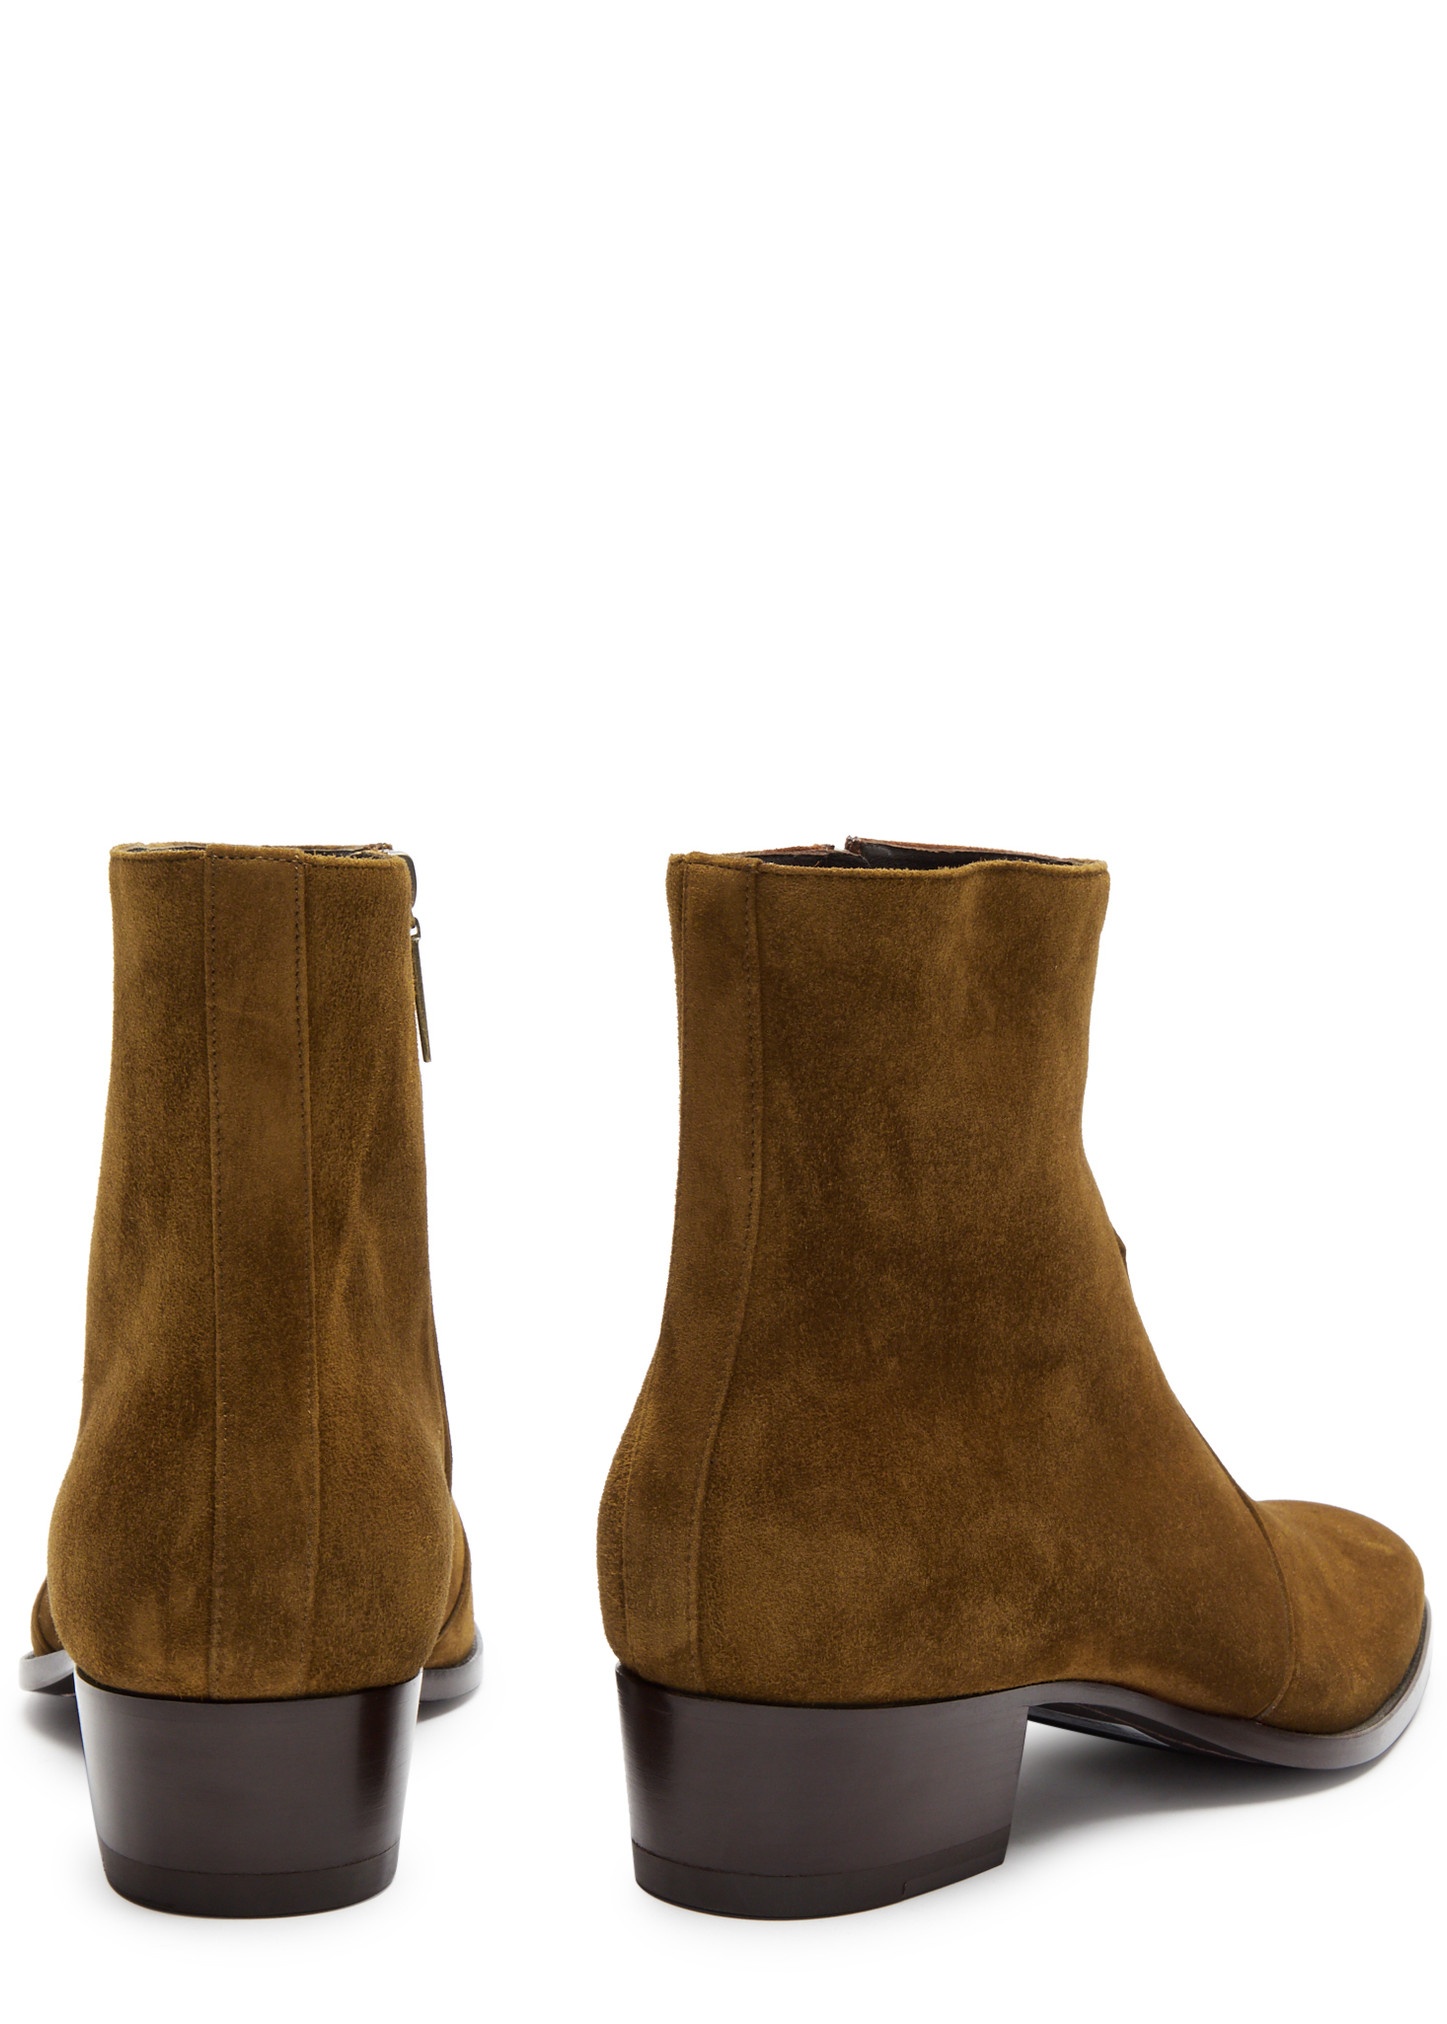 Wyatt 40 suede ankle boots - 3